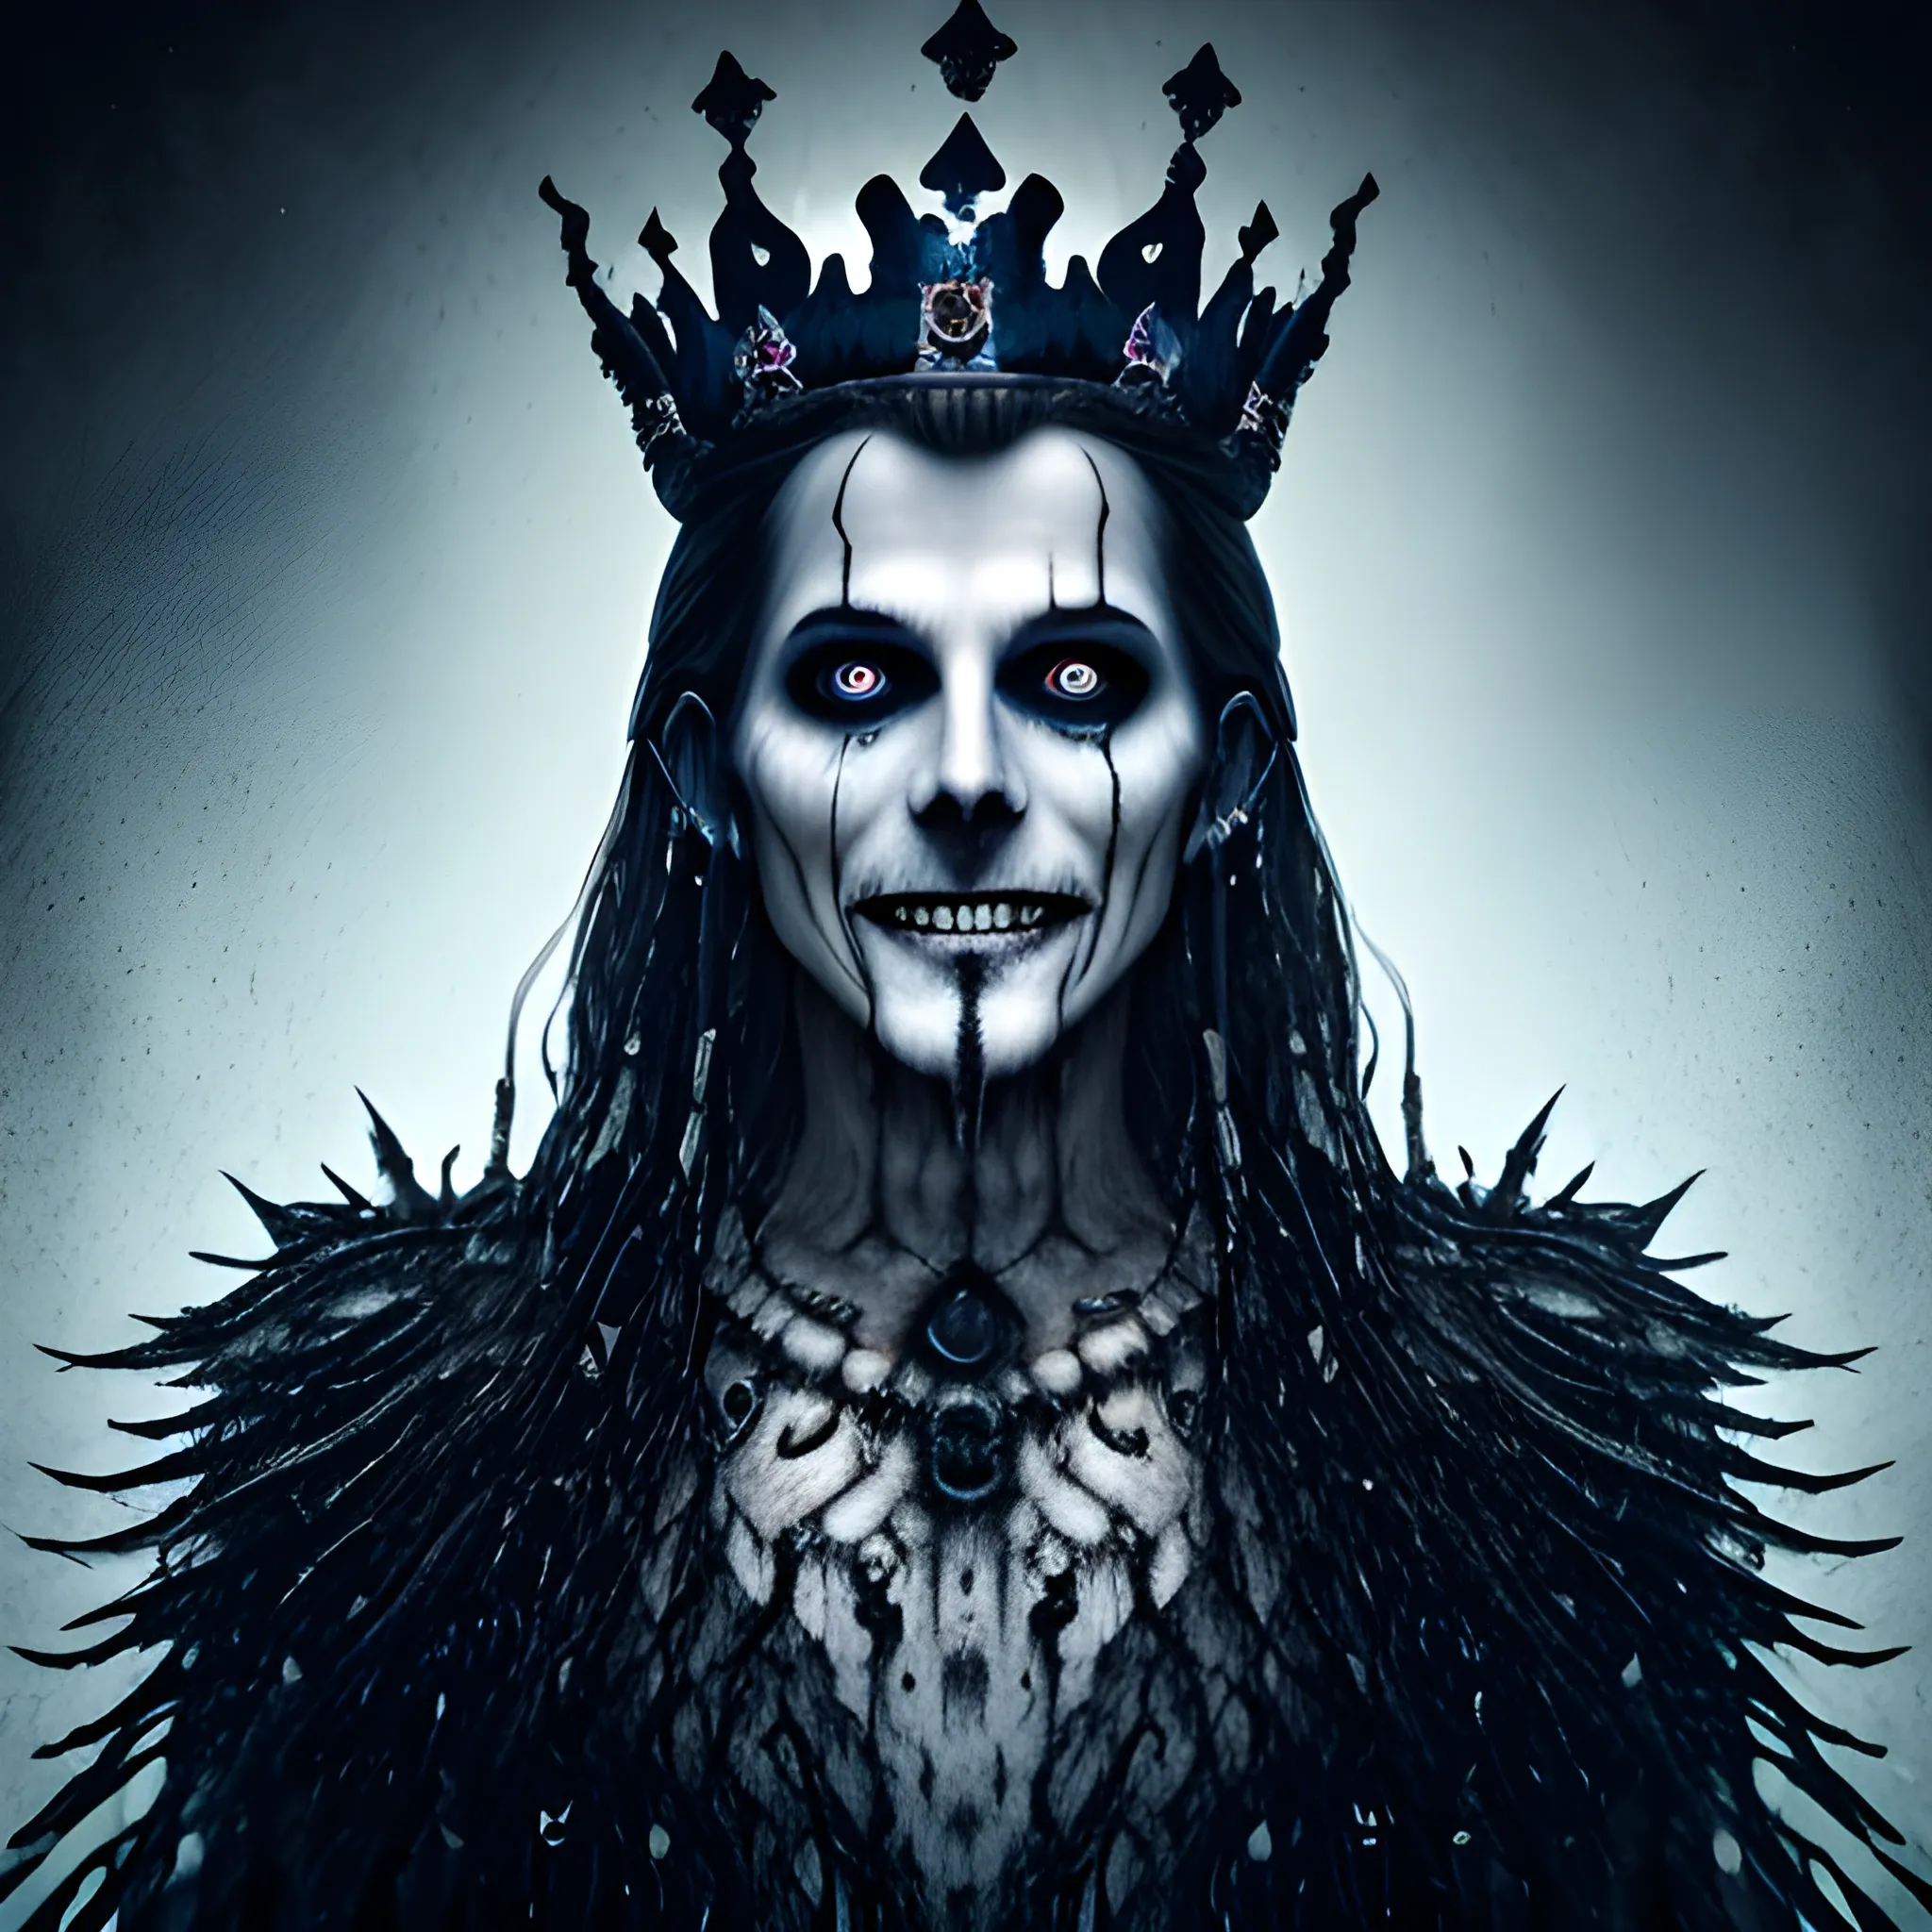 photorealistic image of the king of ghosts  with a black crown, full body, ominous smile, dimmed lighting, blue painted wet hair, wet makeup, evil grim, bokeh lighting